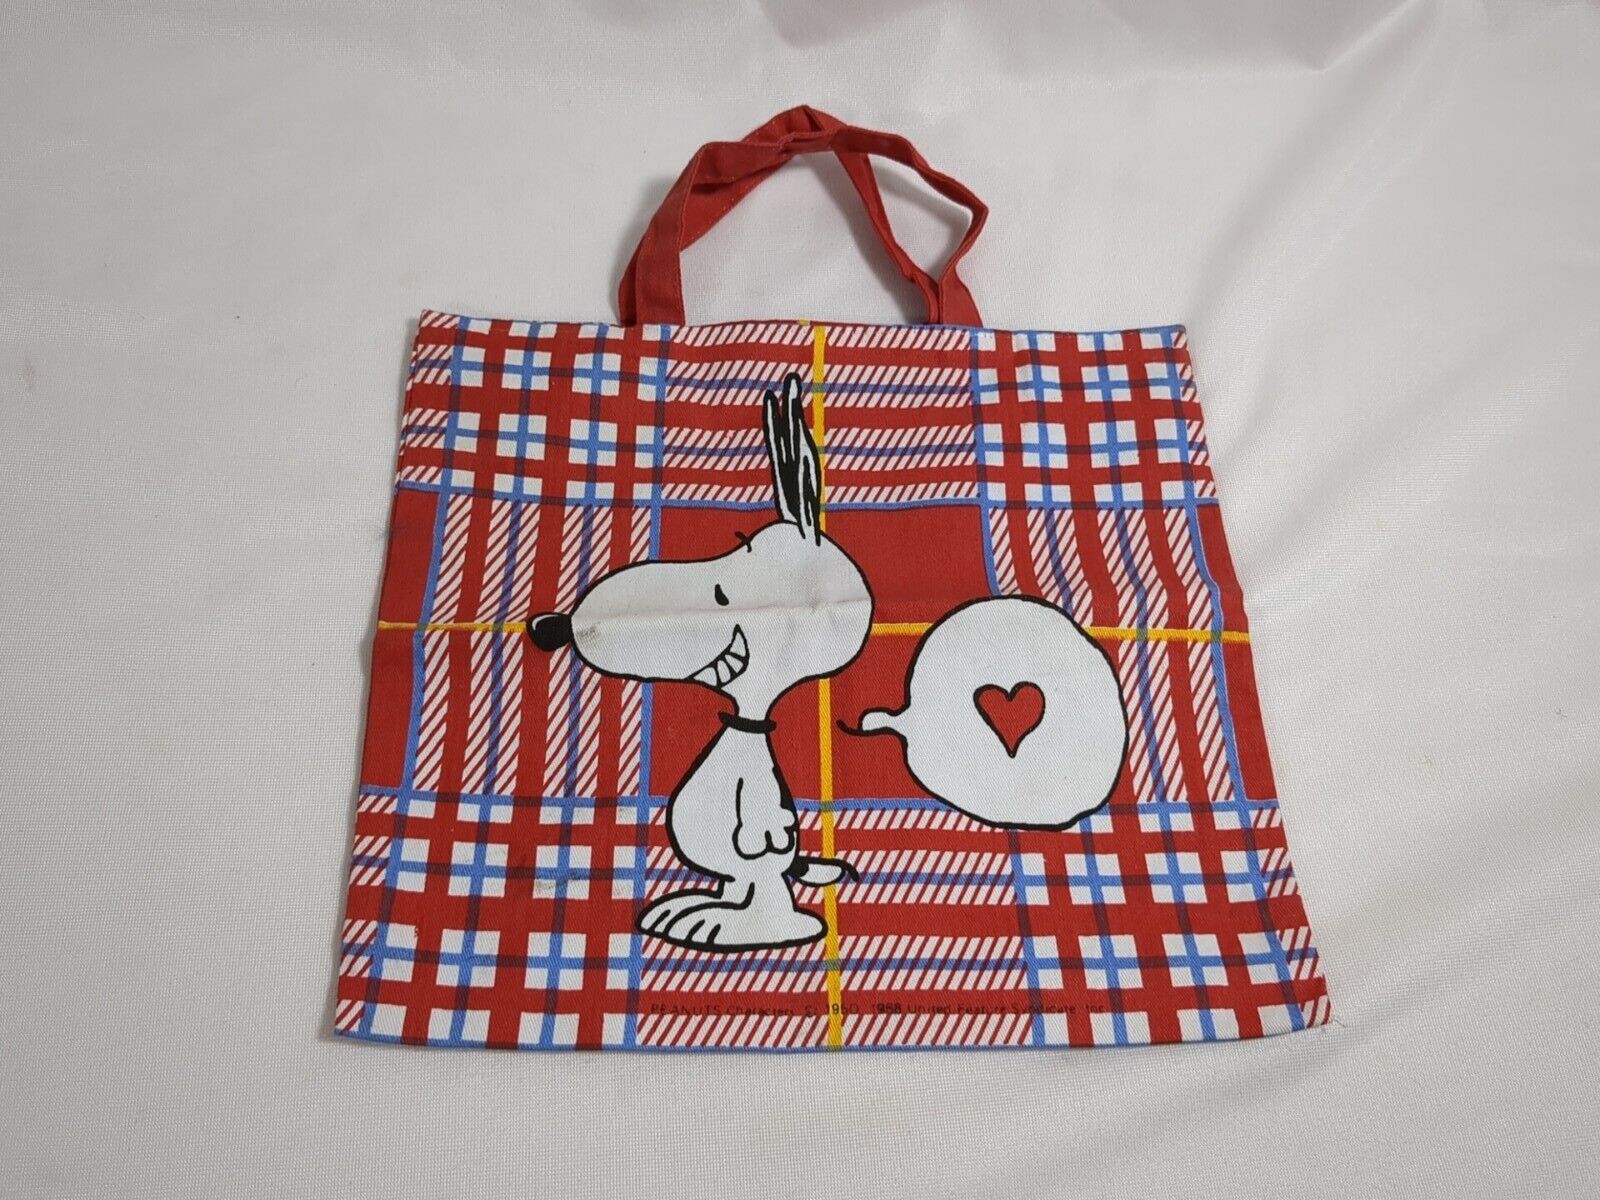 Vintage Snoopy & Charlie Brown Peanuts Canvas Tote Bag United Feature Synd.1958 